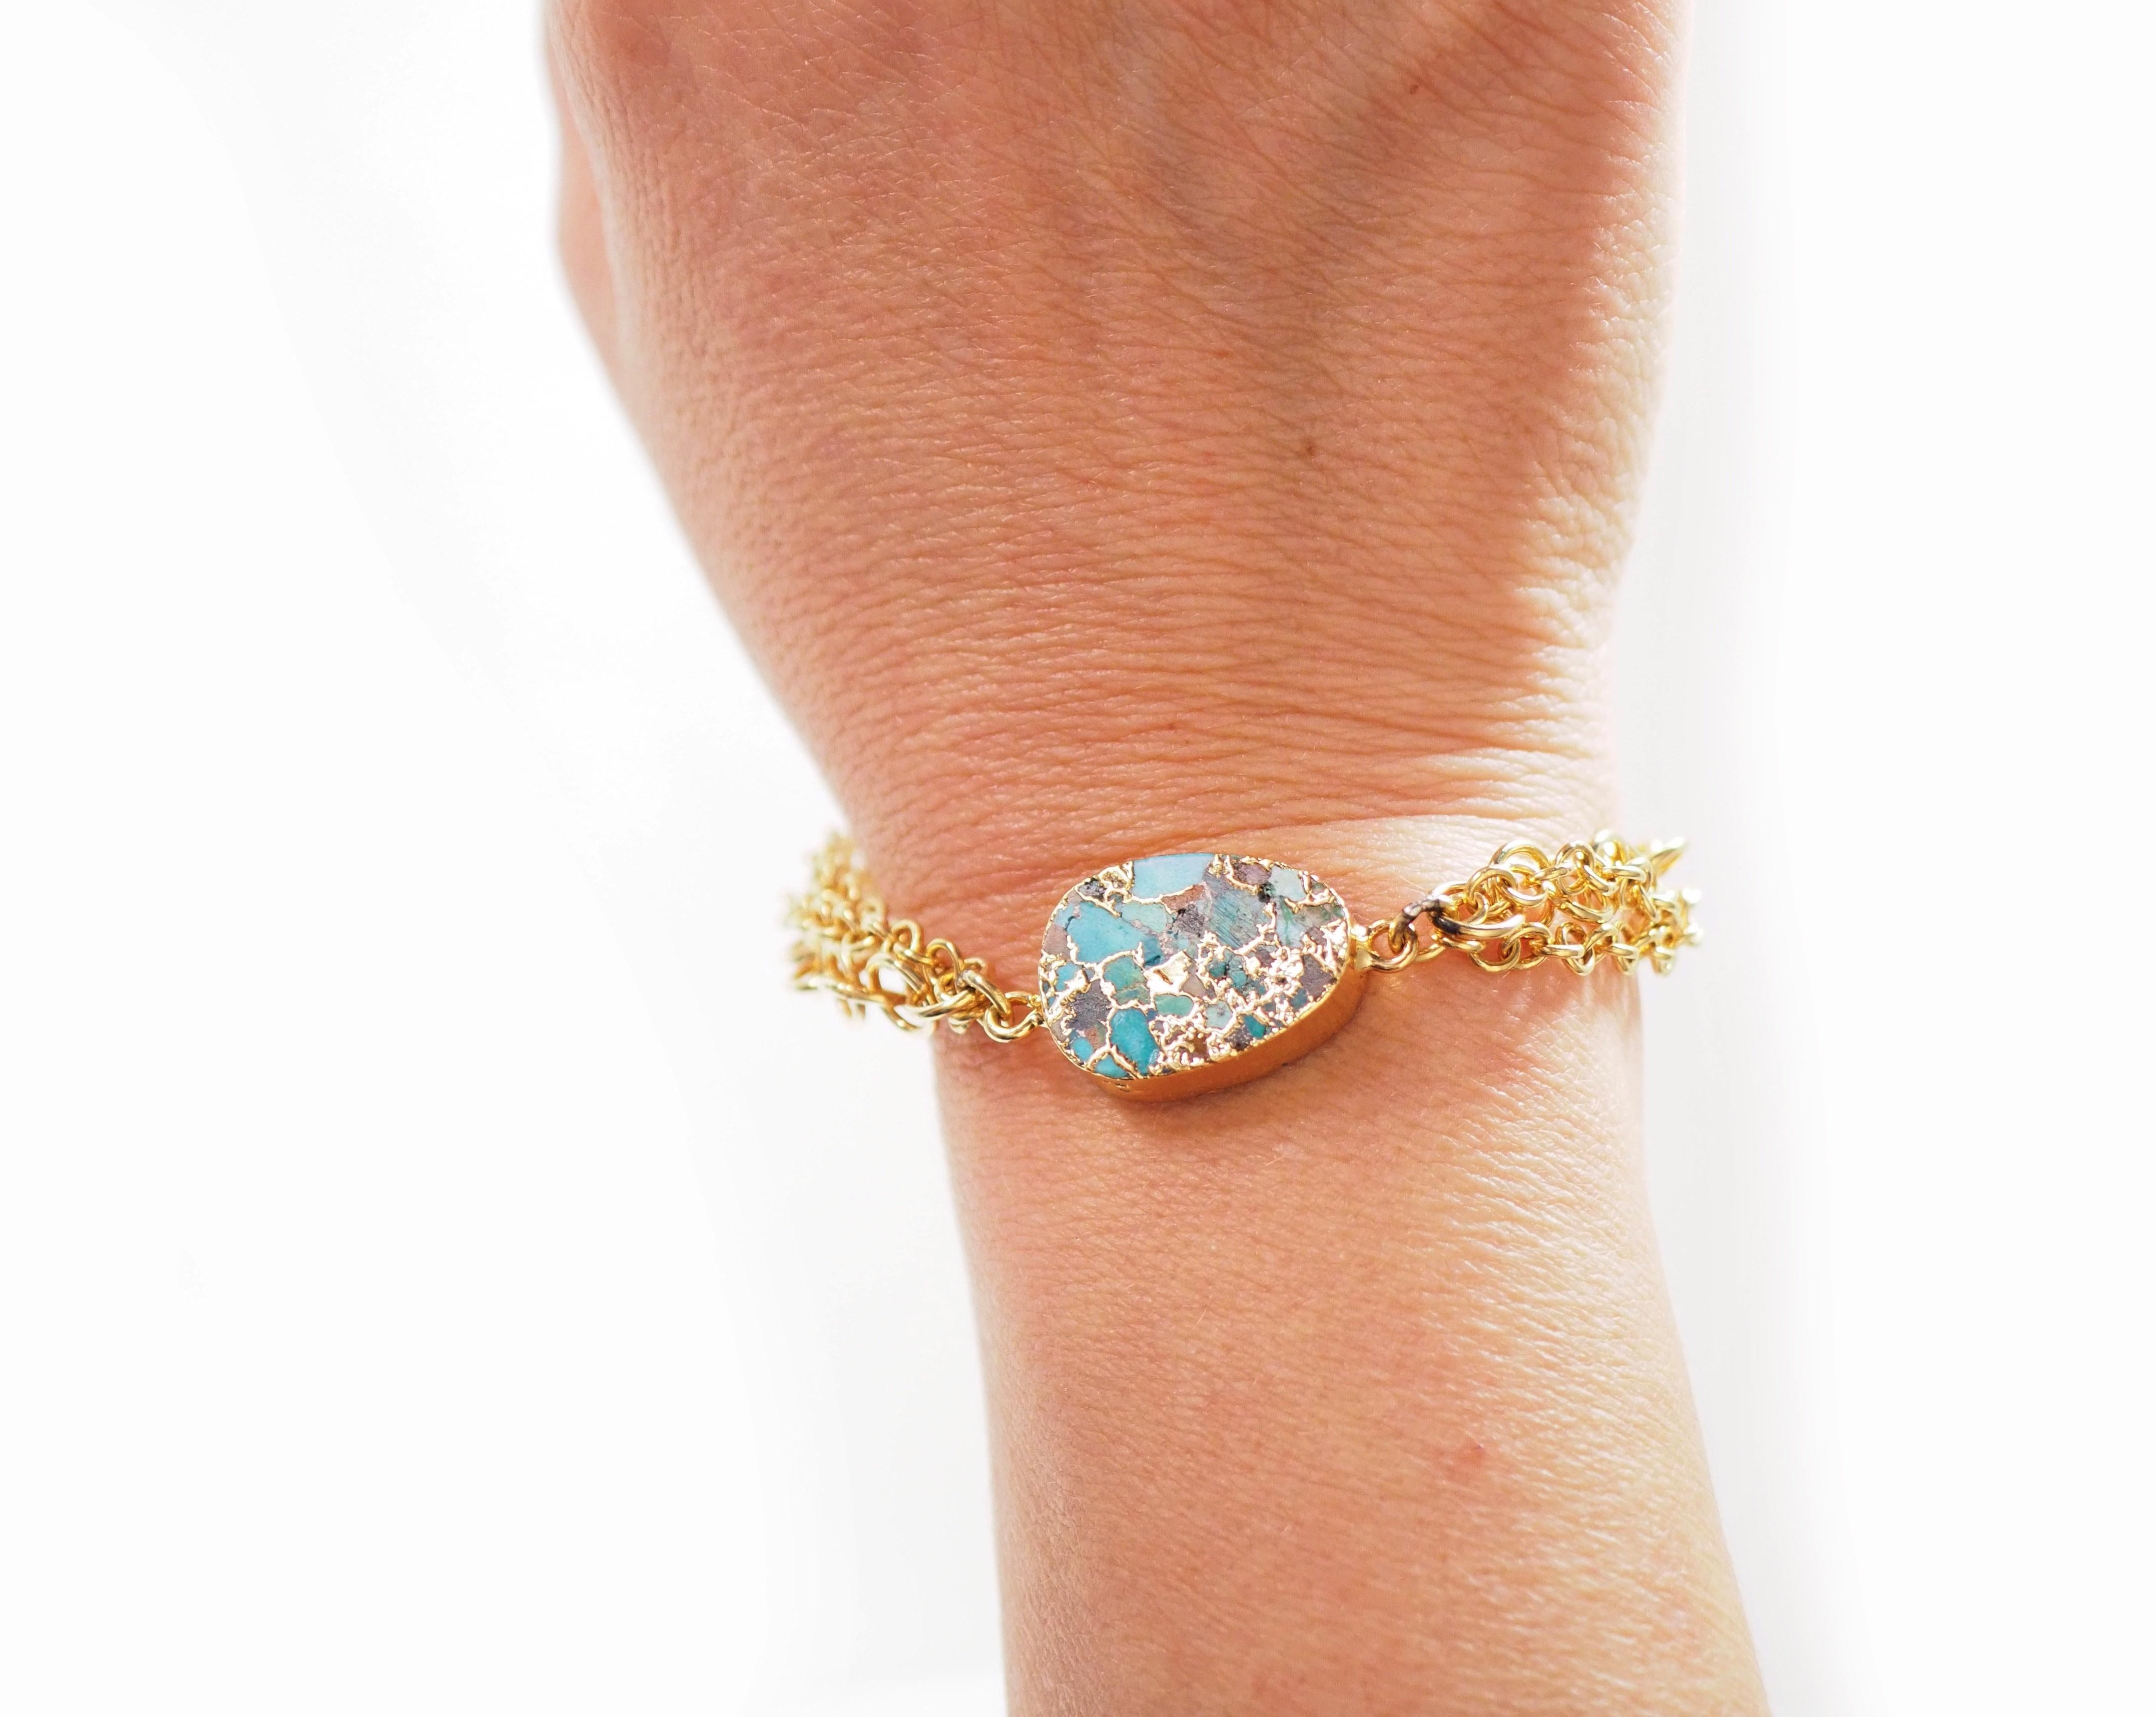 Turquoise zecchino Gold and Gold Plated Bracelet. Adjustable to any size.
All Giulia Colussi jewelry is new and has never been previously owned or worn. Each item will arrive at your door beautifully gift wrapped in our boxes, put inside an elegant